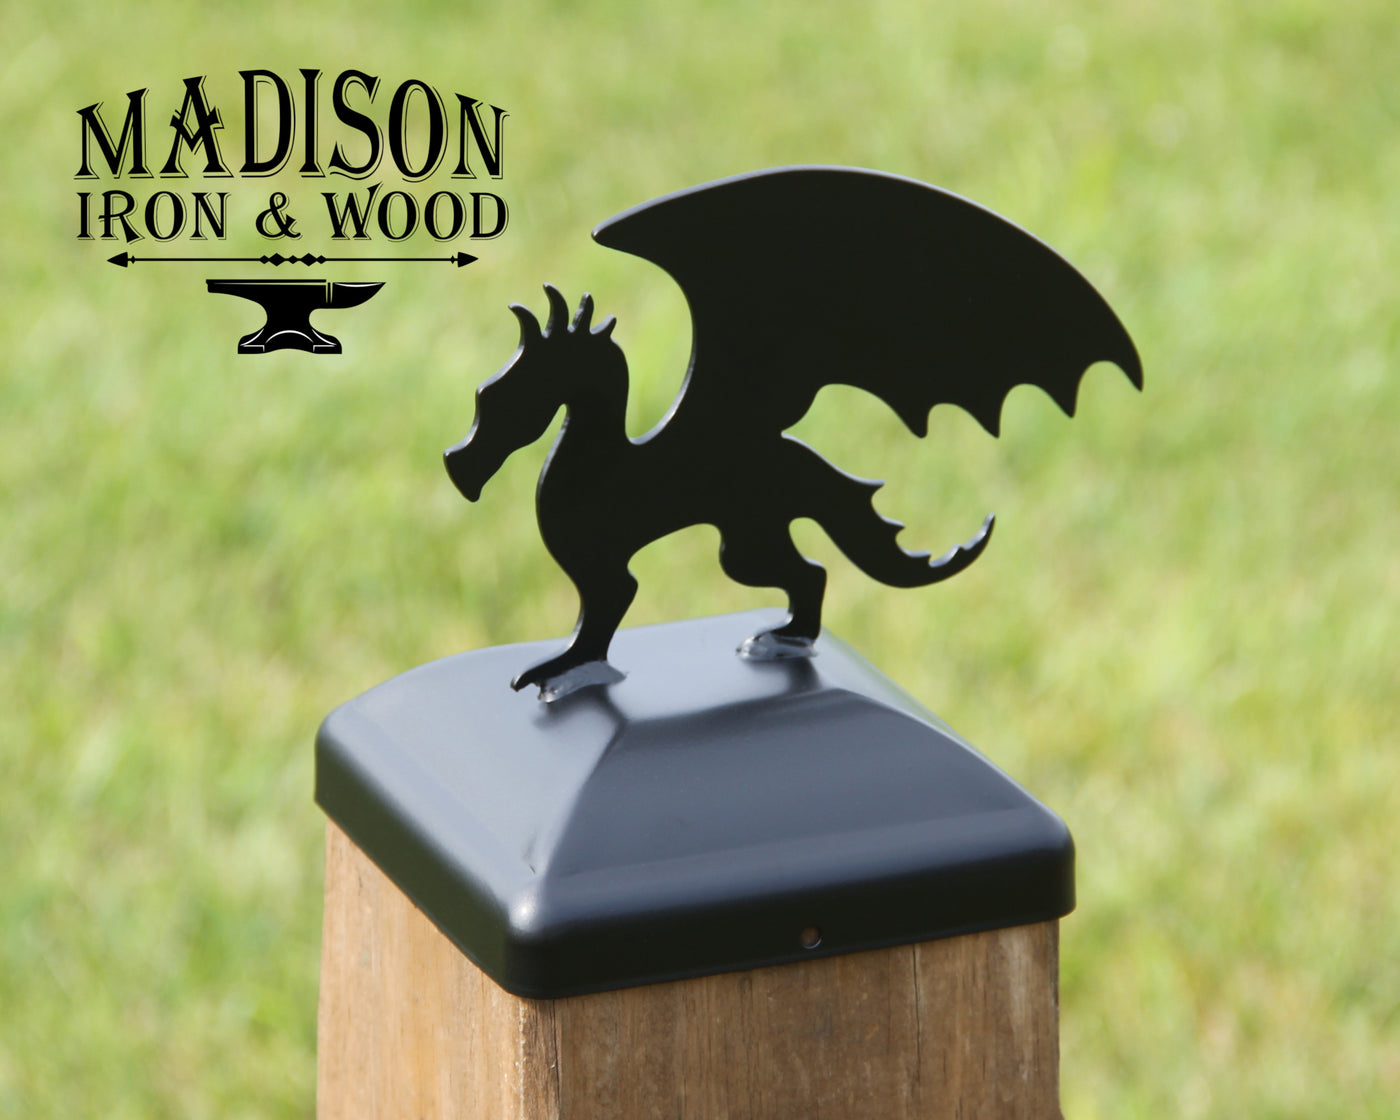 6x6 Dragon Post Cap - Madison Iron and Wood - Post Cap - metal outdoor decor - Steel deocrations - american made products - veteran owned business products - fencing decorations - fencing supplies - custom wall decorations - personalized wall signs - steel - decorative post caps - steel post caps - metal post caps - brackets - structural brackets - home improvement - easter - easter decorations - easter gift - easter yard decor